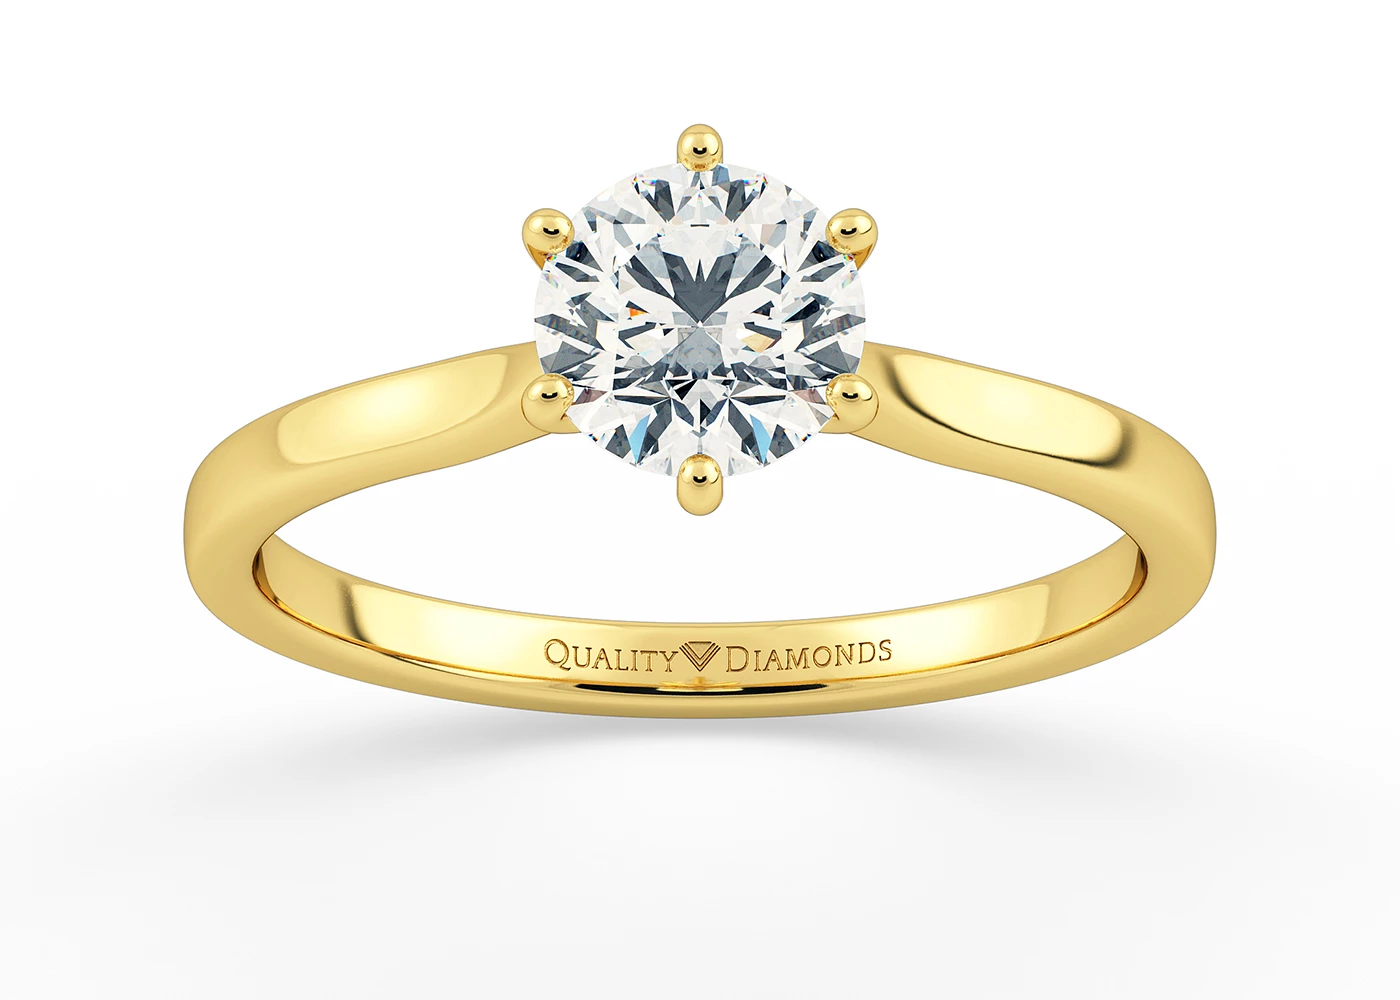 Six Claw Round Brilliant Beau Diamond Ring in 9K Yellow Gold